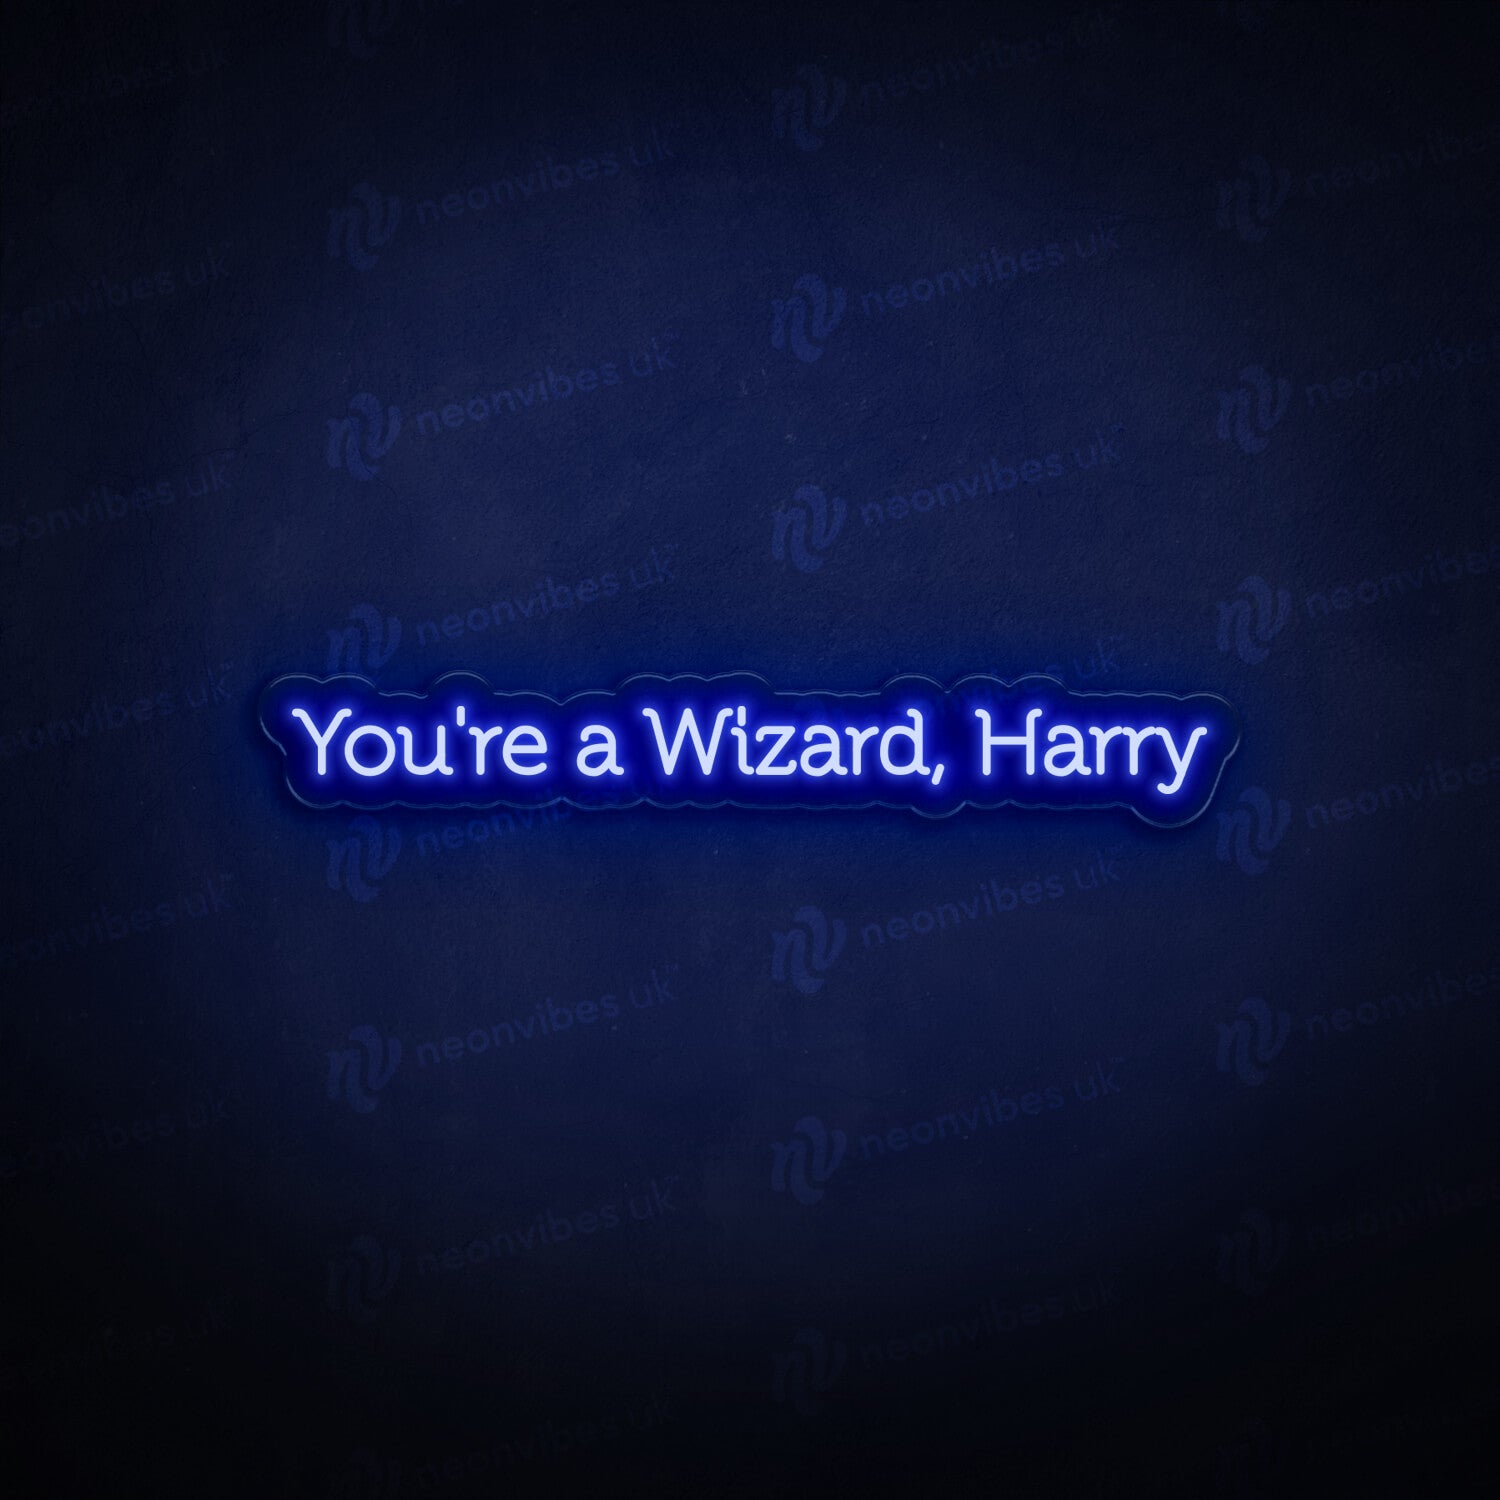 Harry Potter neon sign